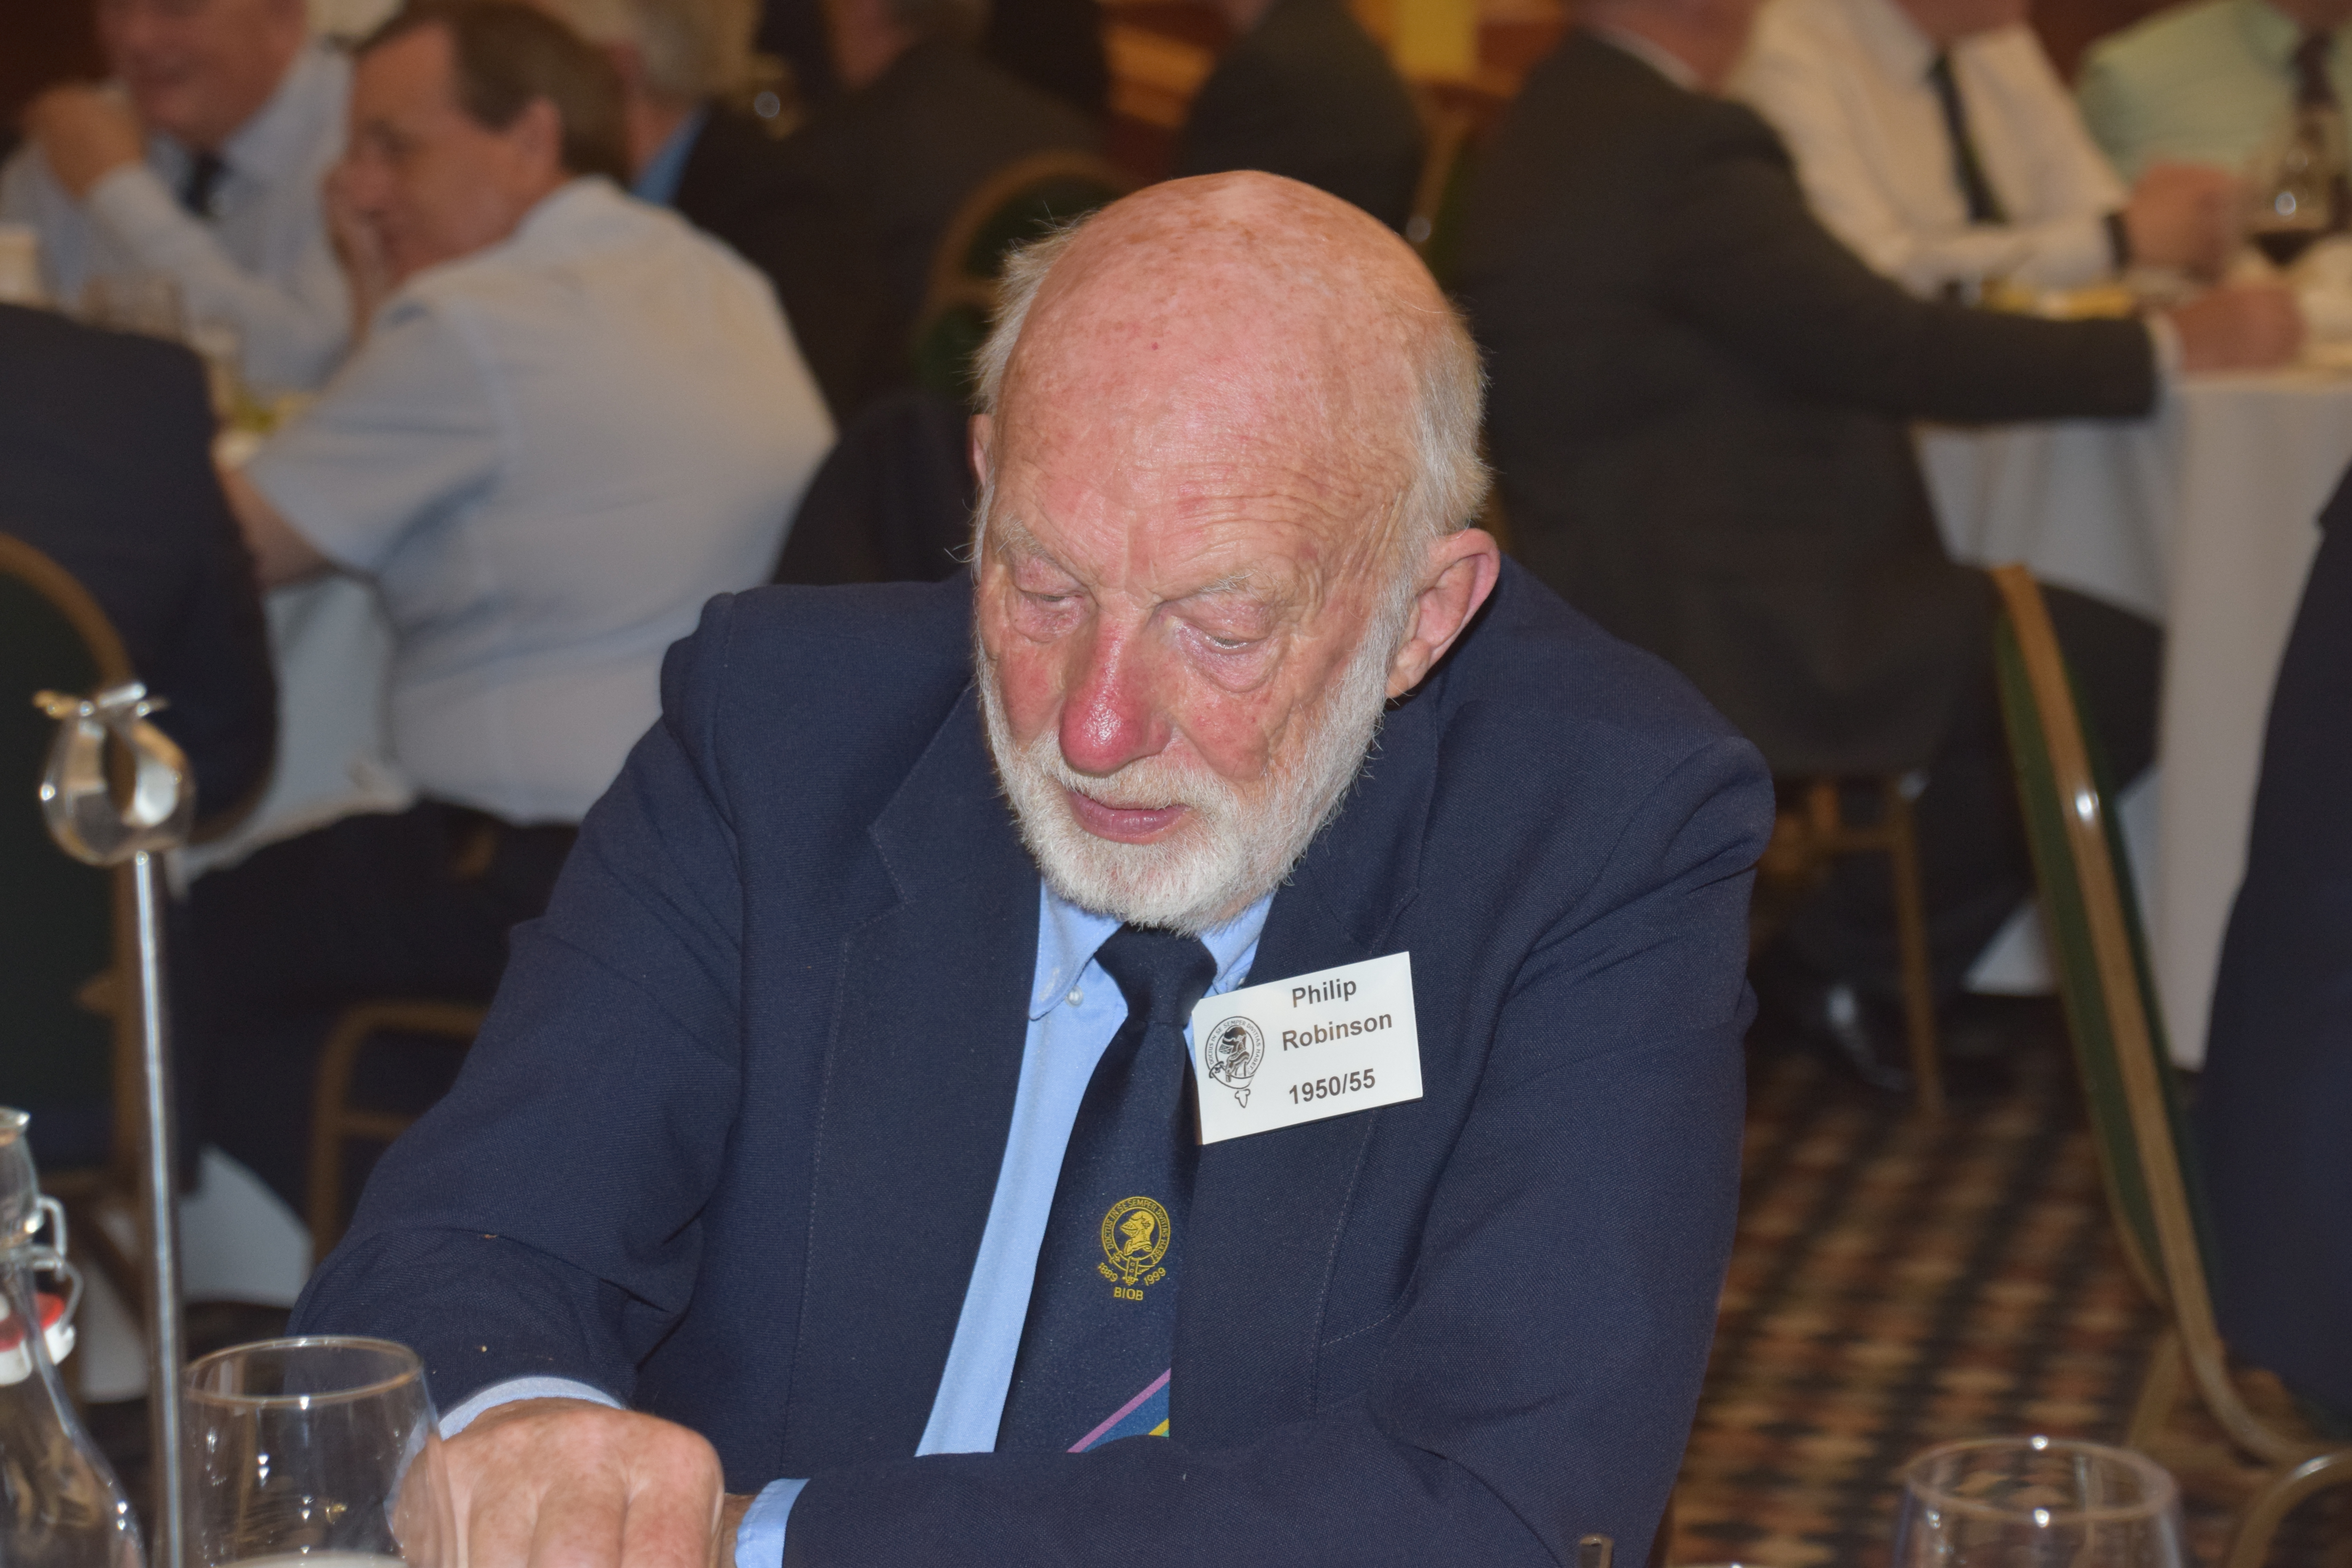 Photograph of Philip Robinson (1950/55) at Reunion Dinner 2019